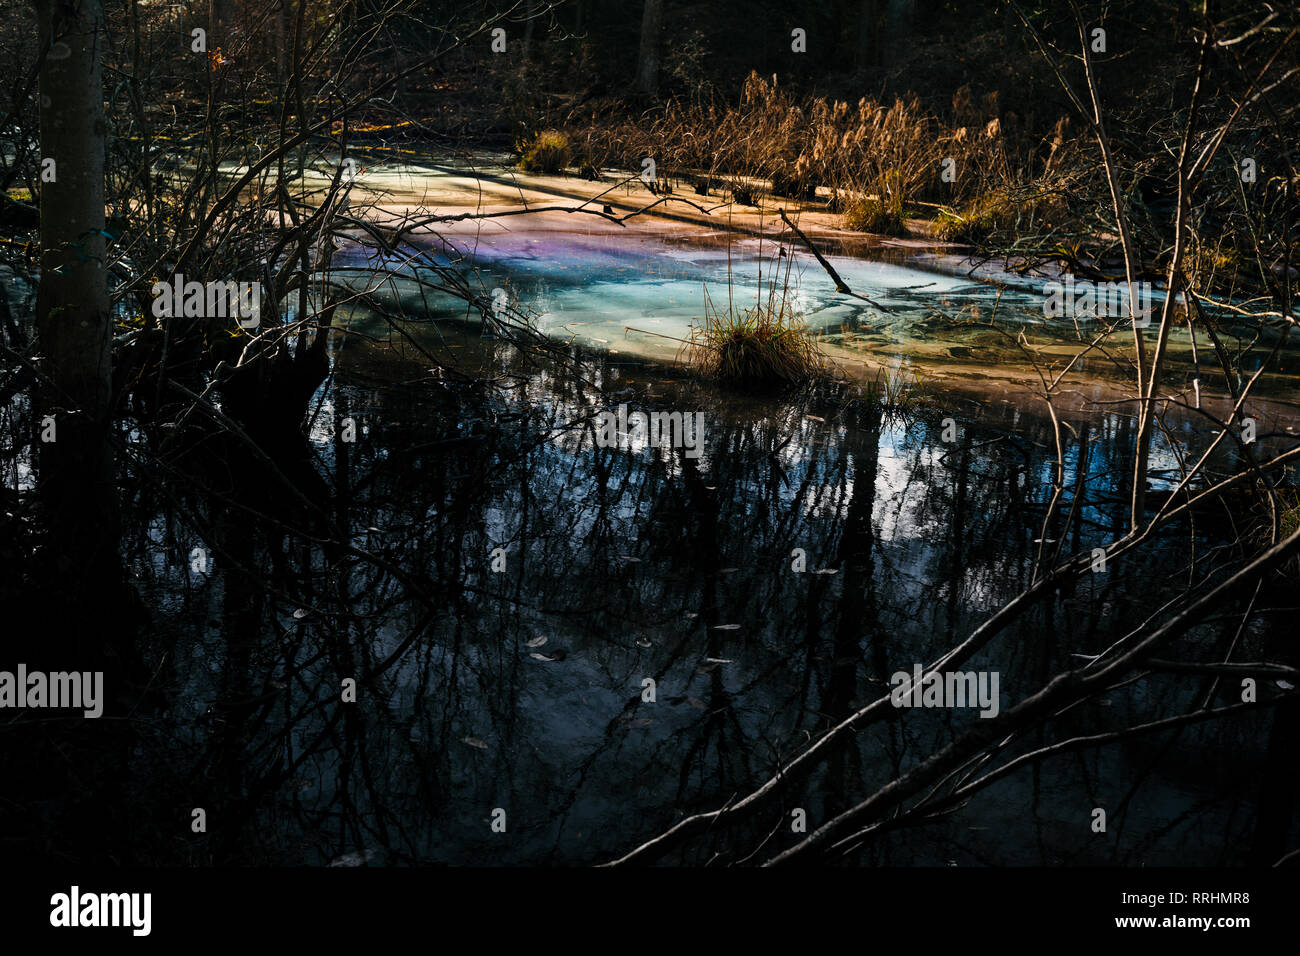 Colorful toxic water pollution in wetland environmental hazard environment. Stock Photo